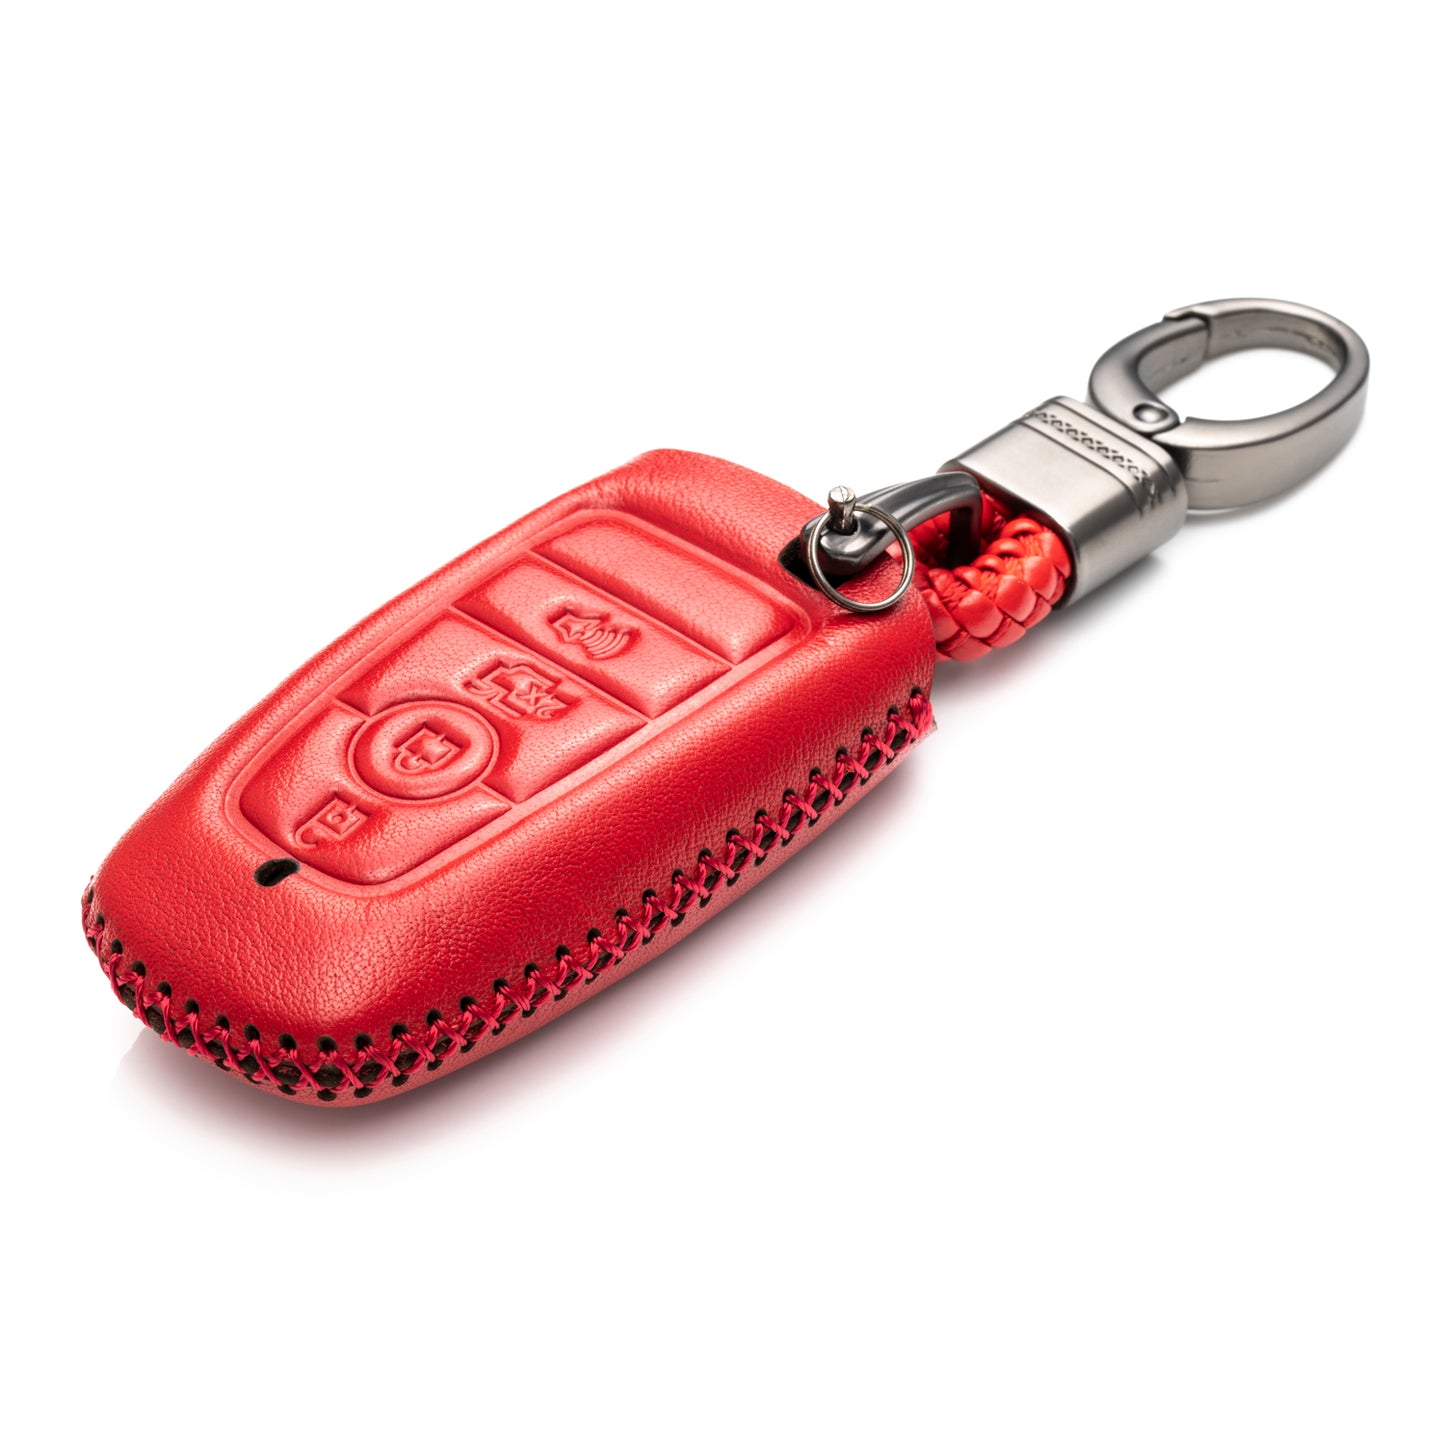 Vitodeco Leather Smart Key Fob Case Compatible with Ford Escape 2024, Bronco 2024, Explorer 2024, Edge 2024, Expedition 2024, F-150, Mustang 2024, F150 2024 and More Models